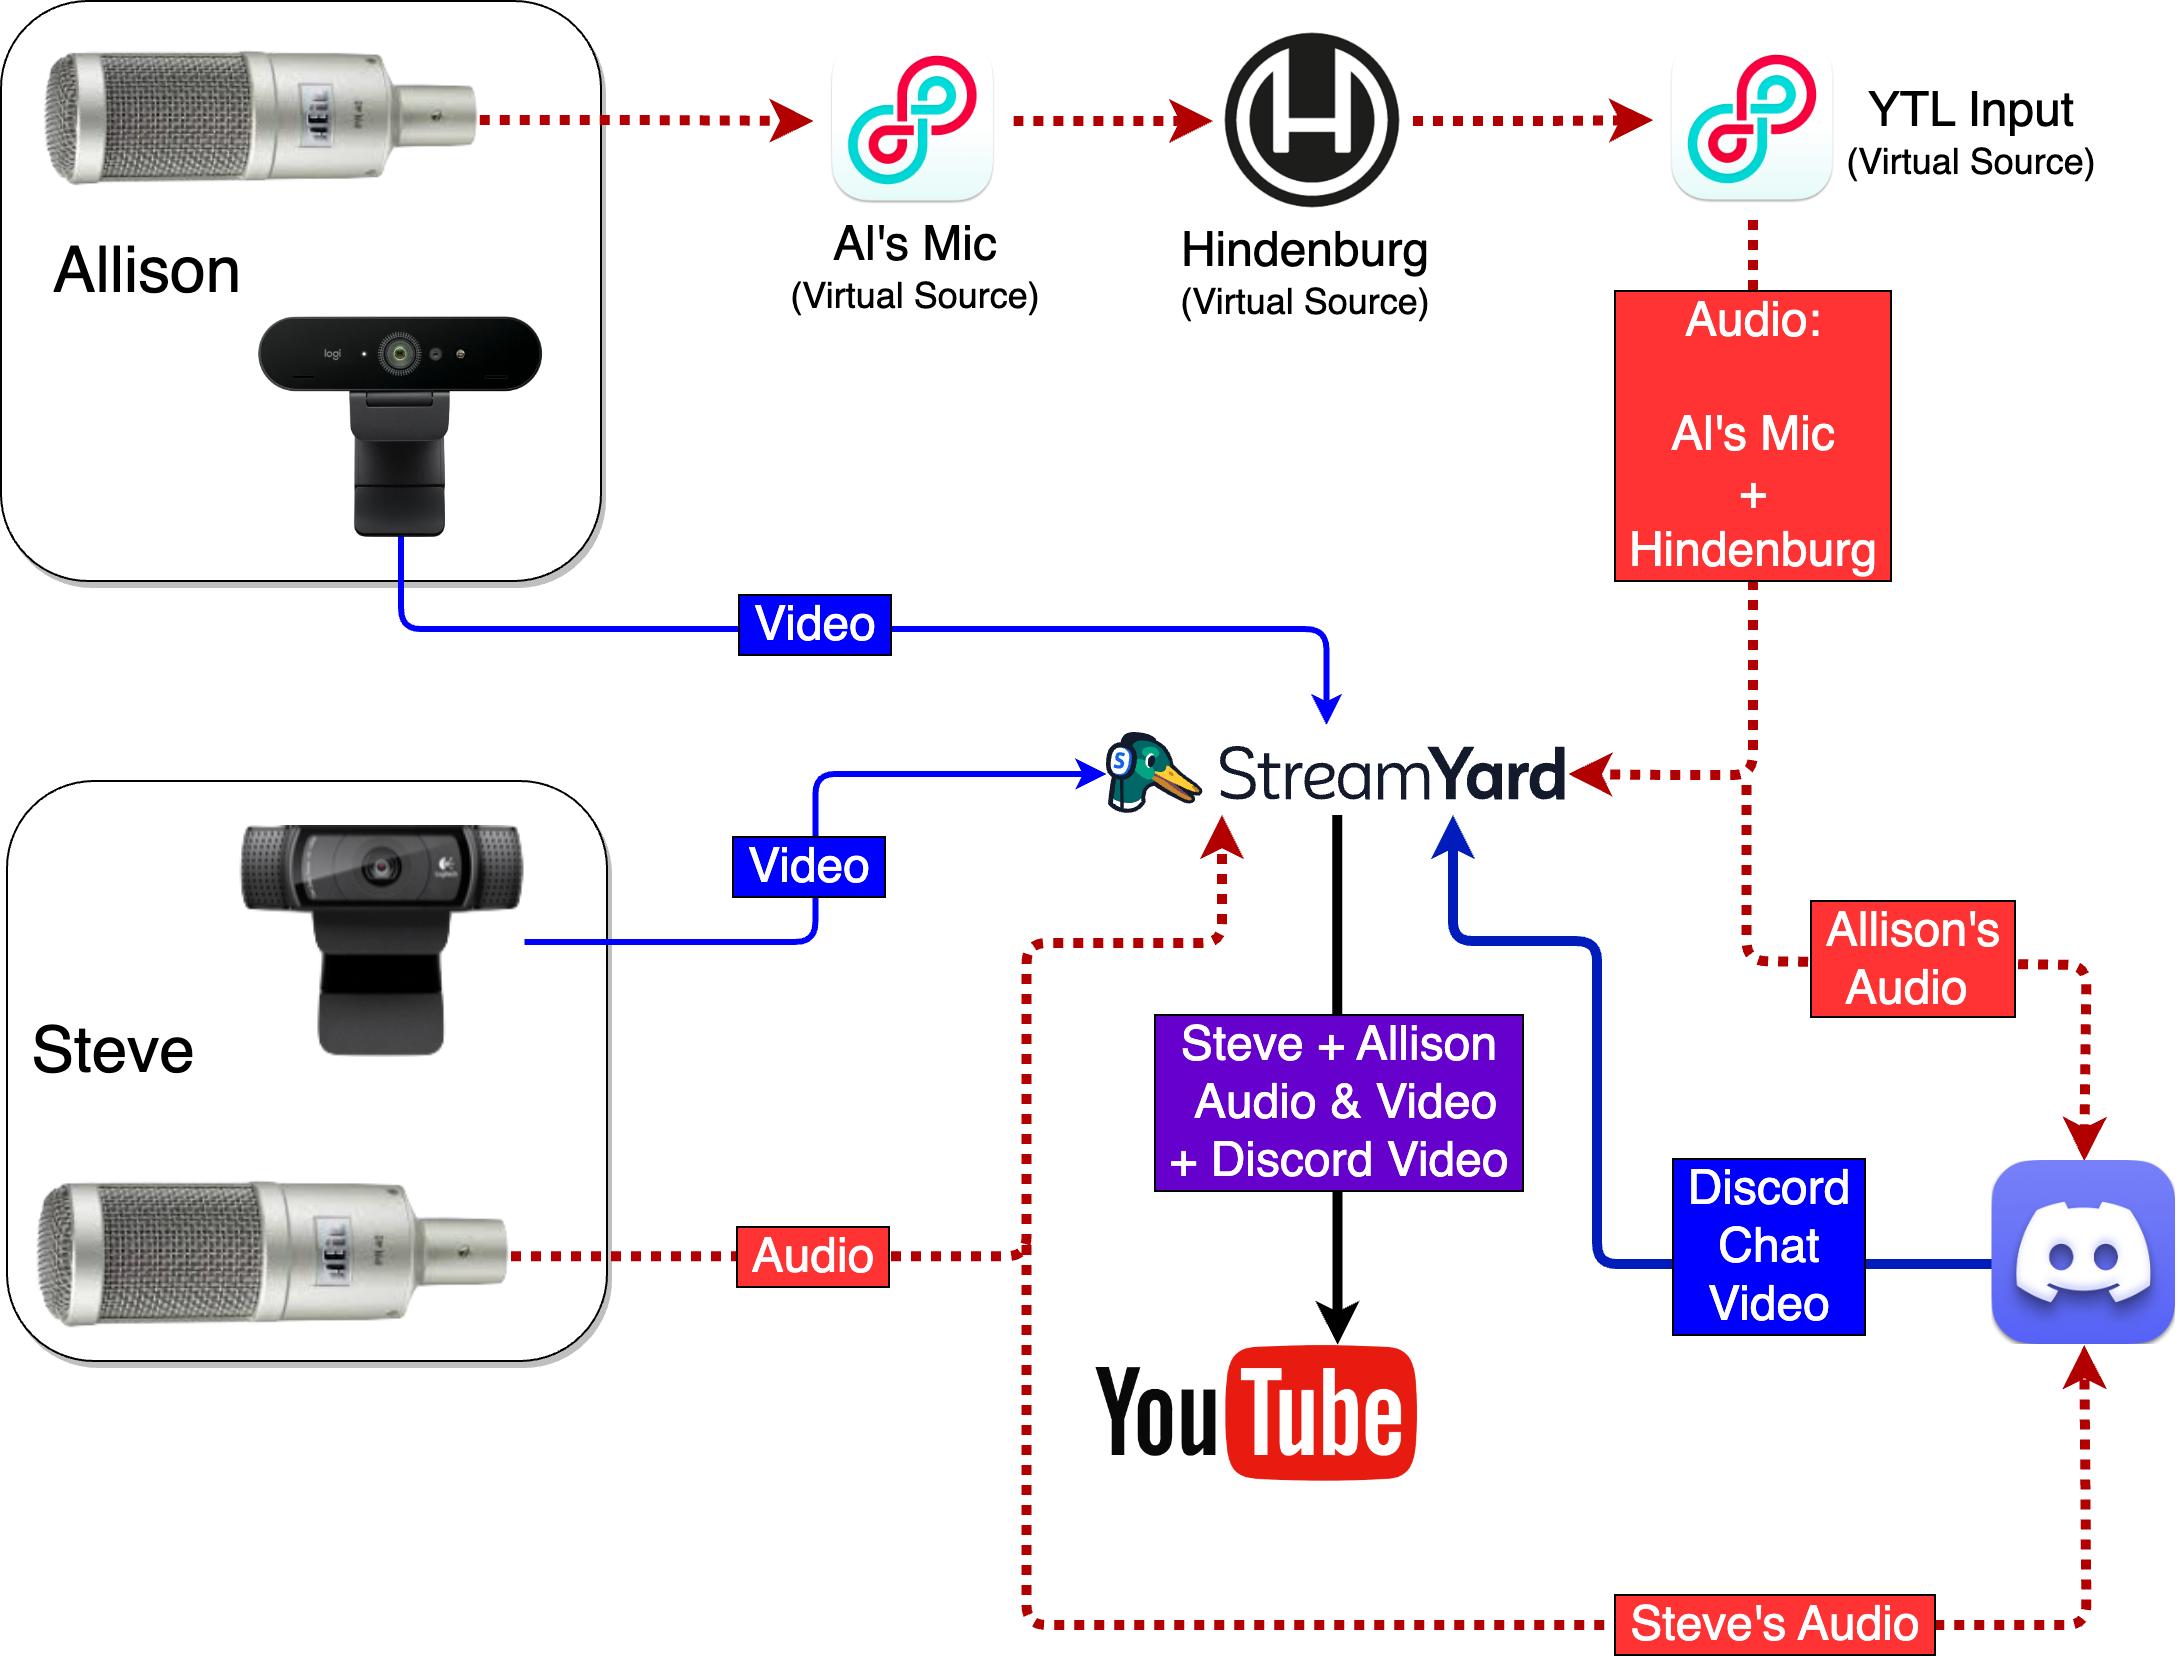 mics, applications, showing video and audio flows to and from apps